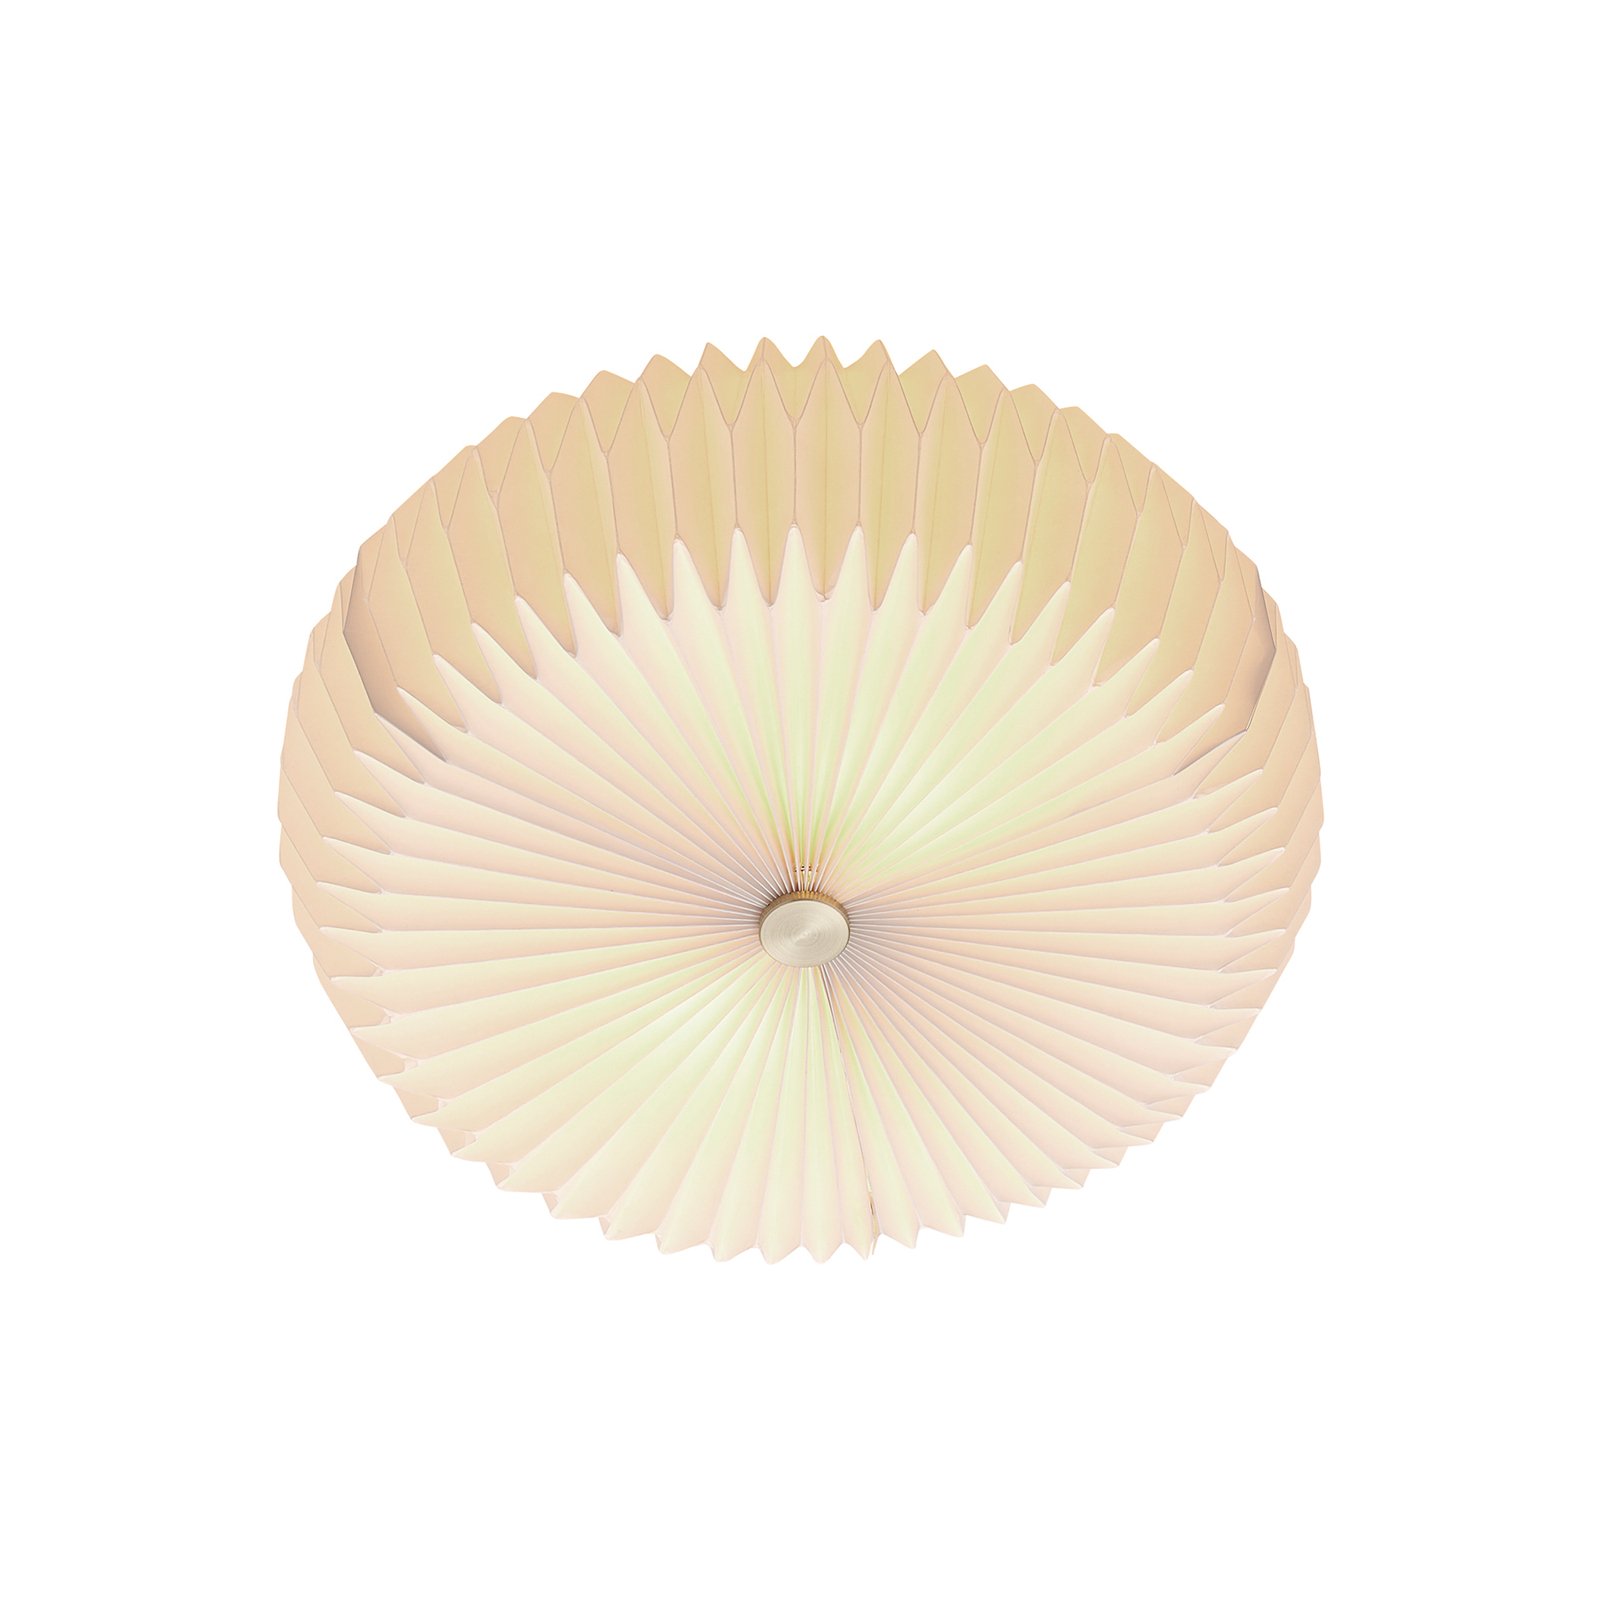 Belloy 40 ceiling light, pleated paper shade, white